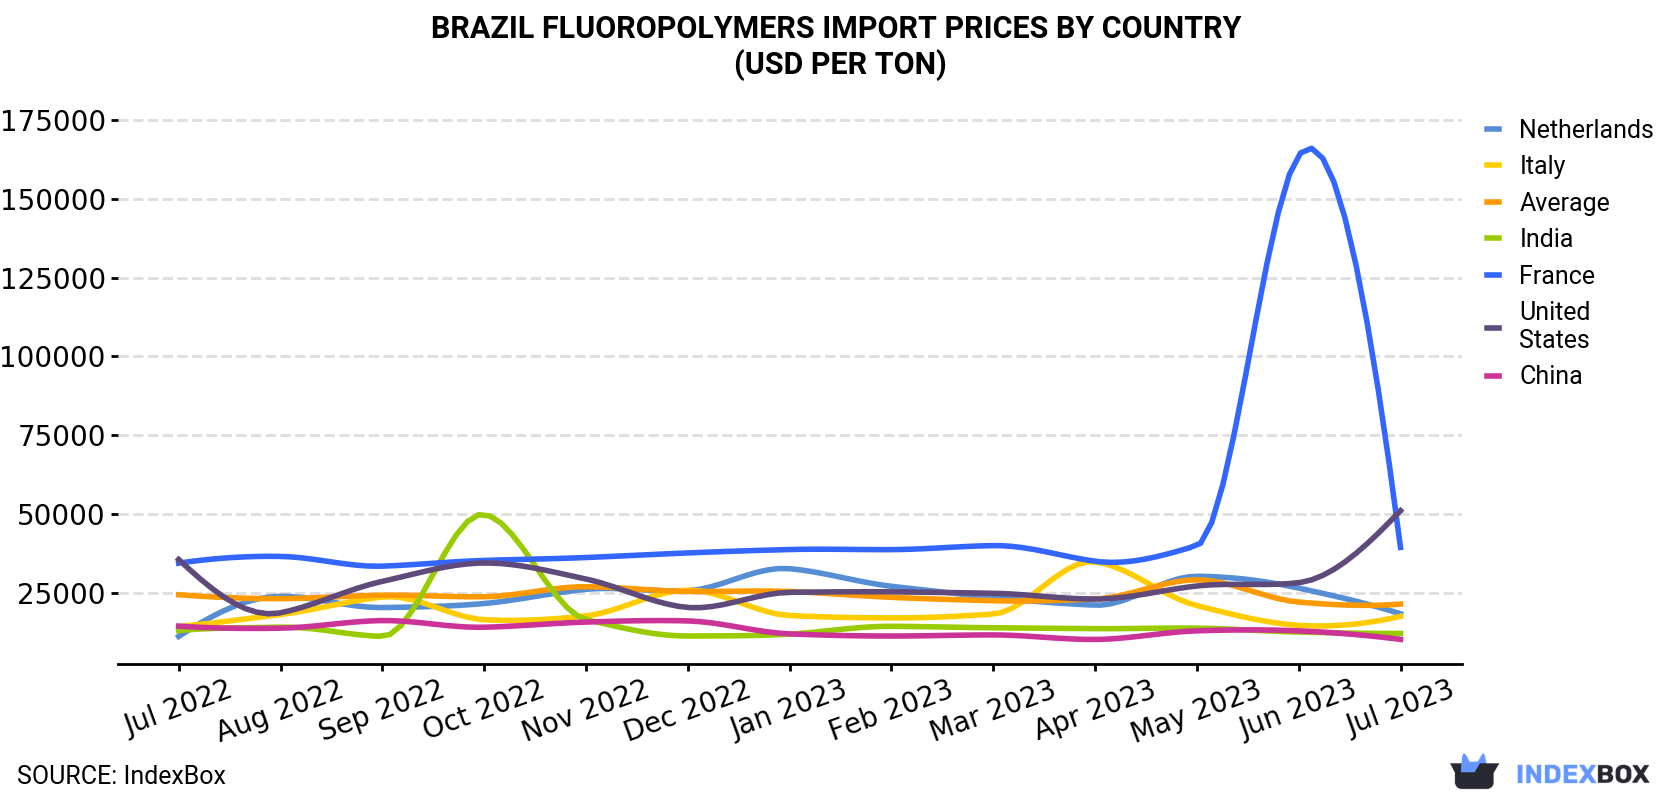 Brazil Fluoropolymers Import Prices By Country (USD Per Ton)